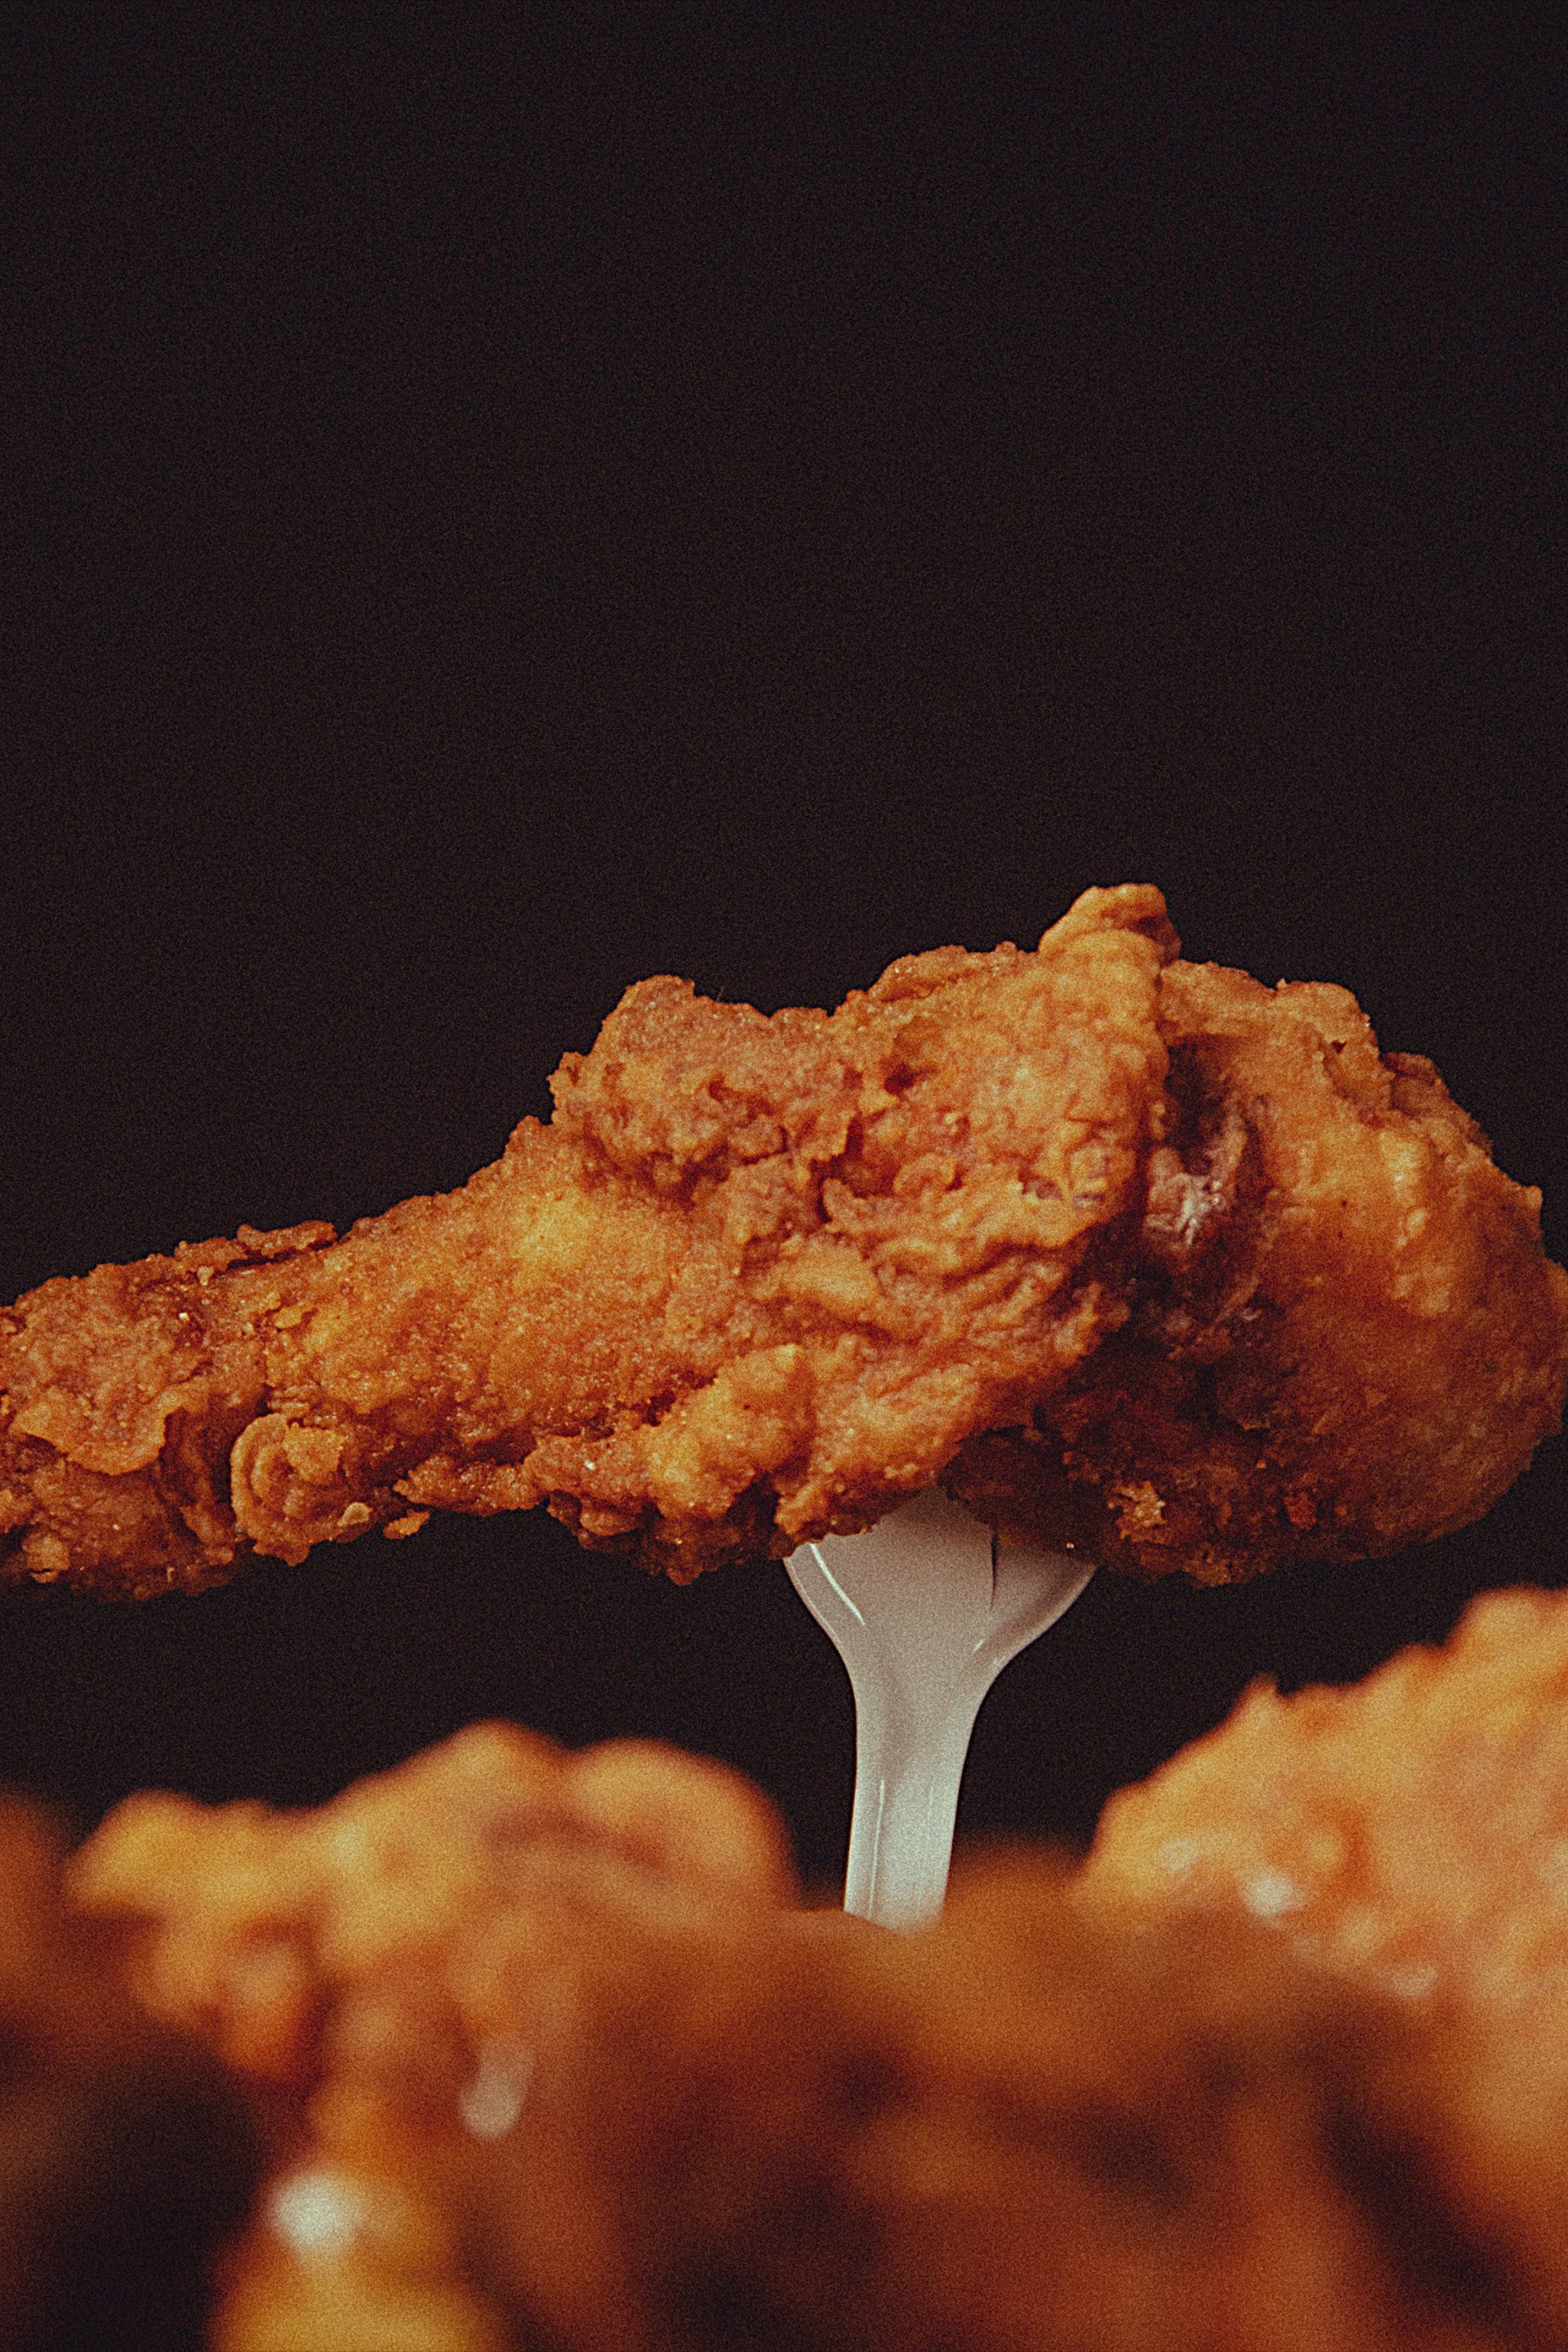 a close up of a piece of fried chicken on a fork .